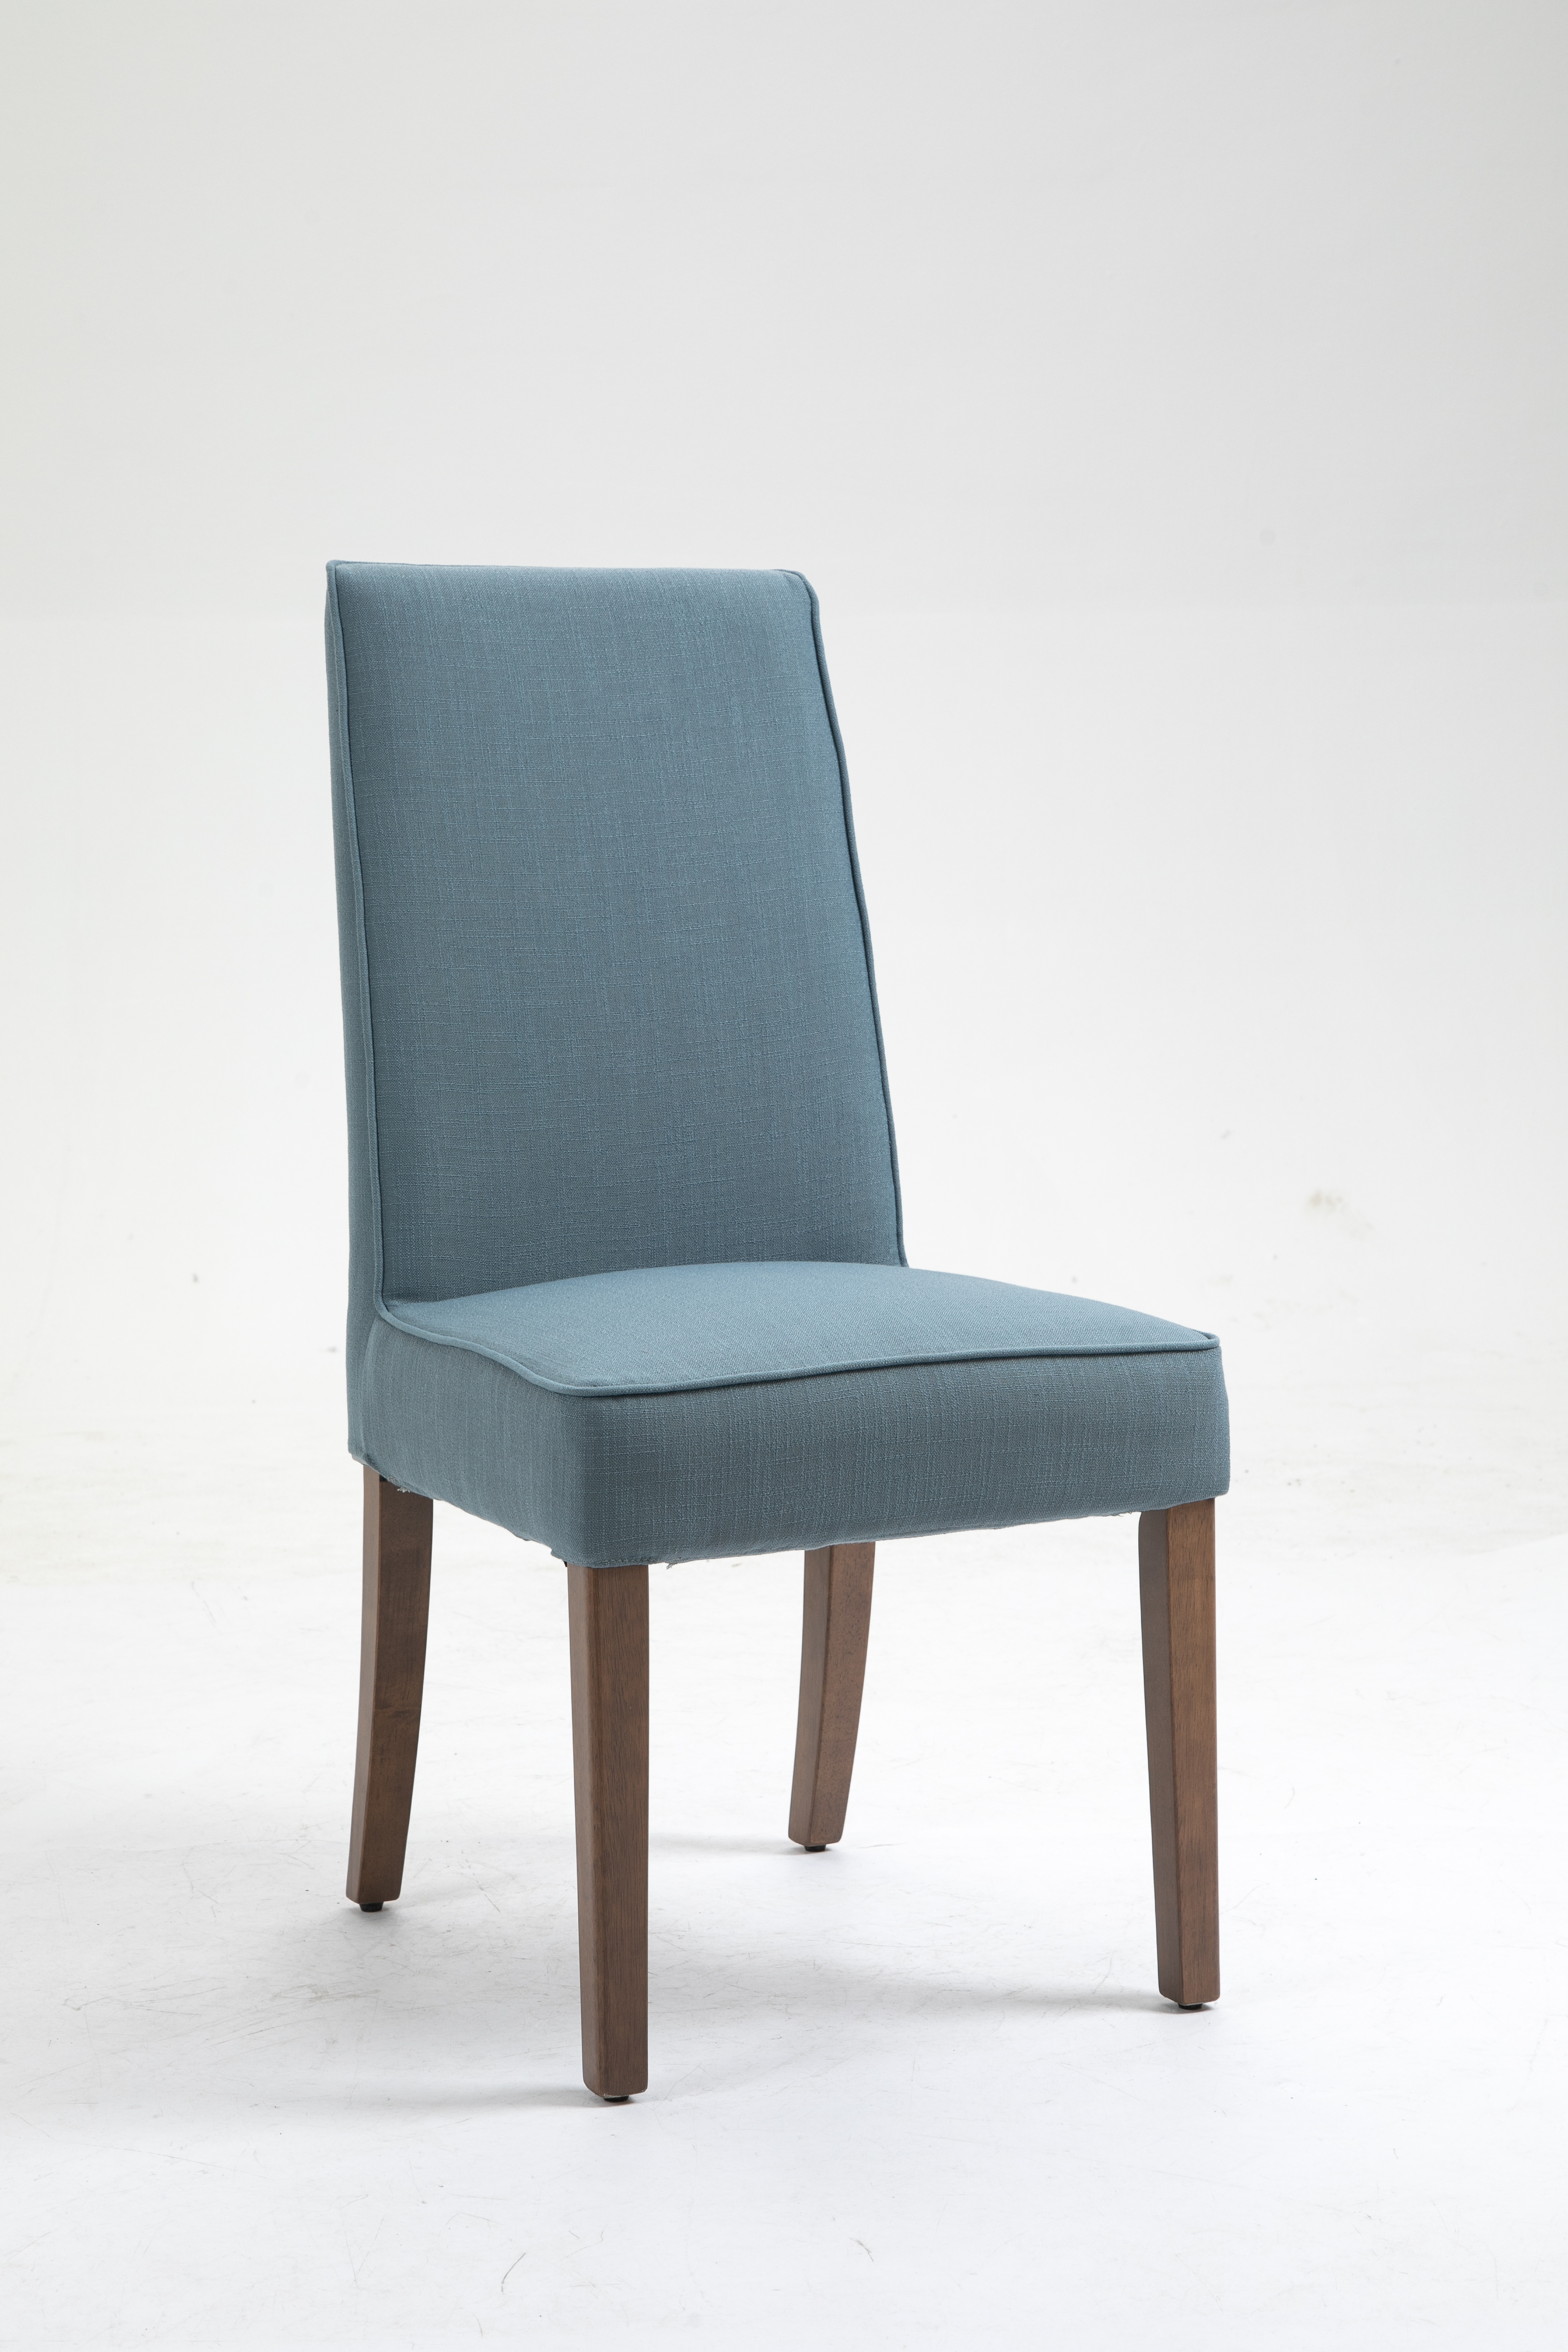 Washable Blue Linen Upholstered Parsons Chair with Solid Wood Legs 2 PCS-CASAINC